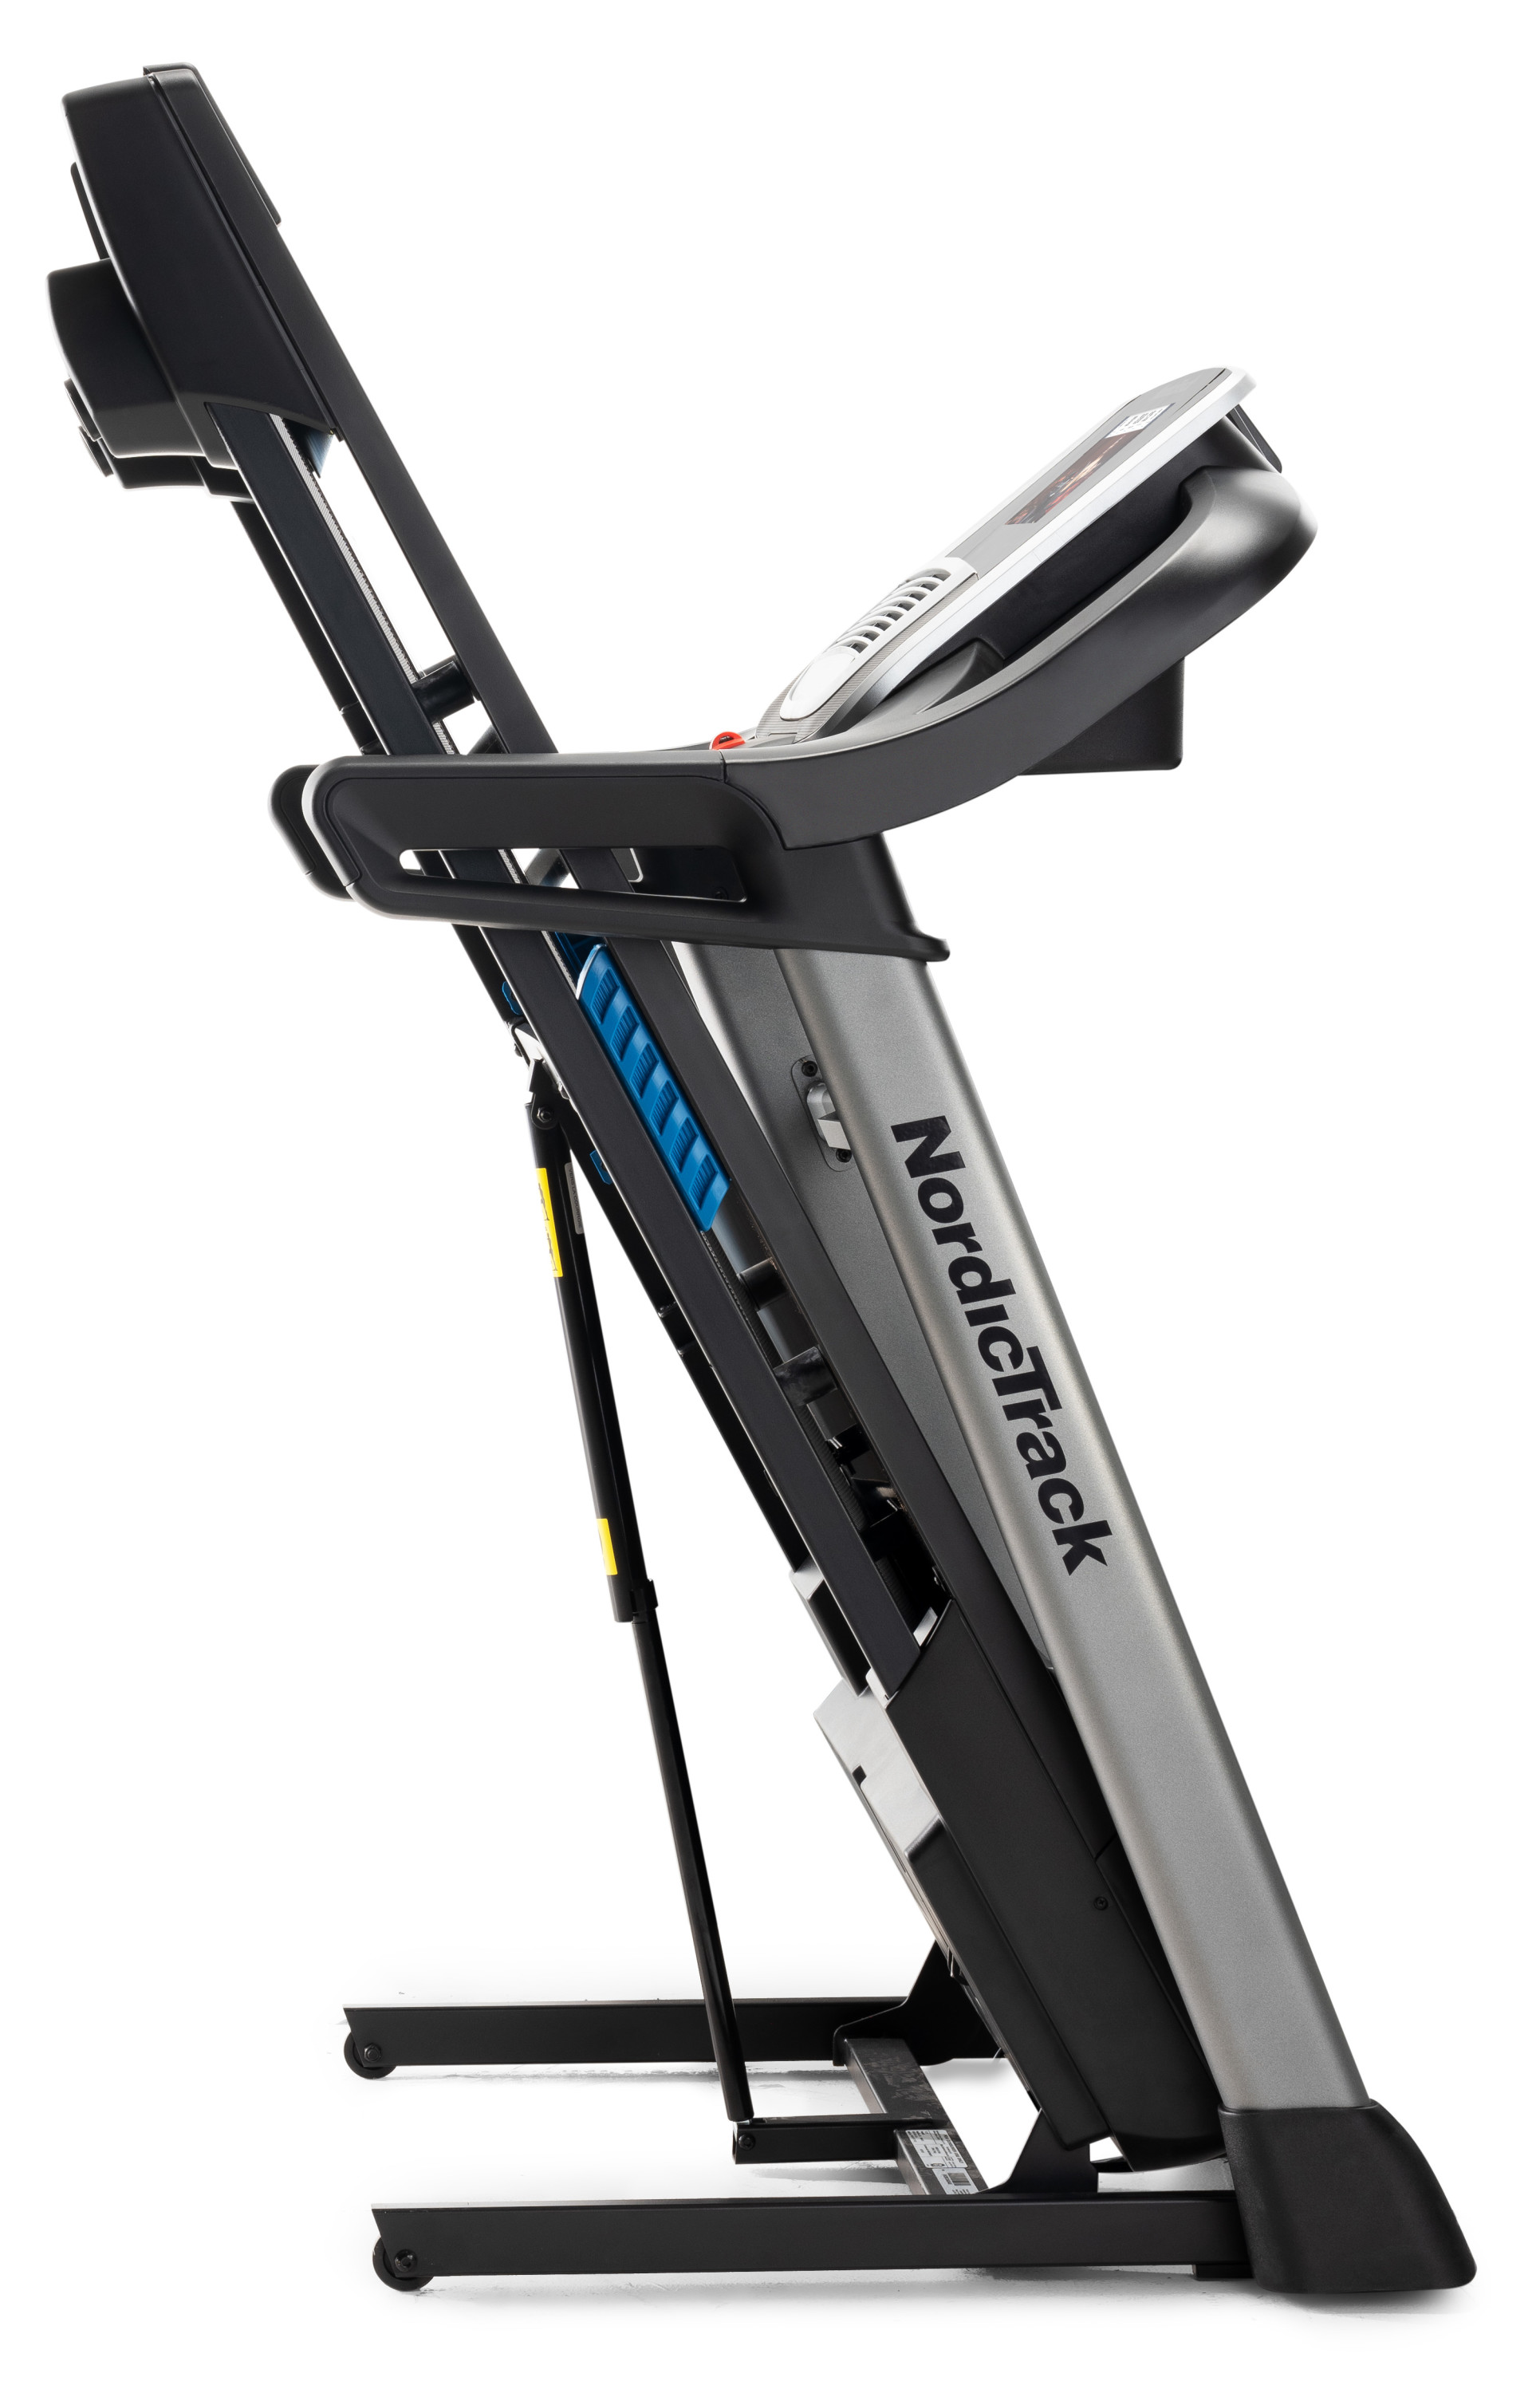 NordicTrack C 1100i Smart Treadmill with 10” Touchscreen and and 30-Day iFIT Family Membership - image 4 of 6